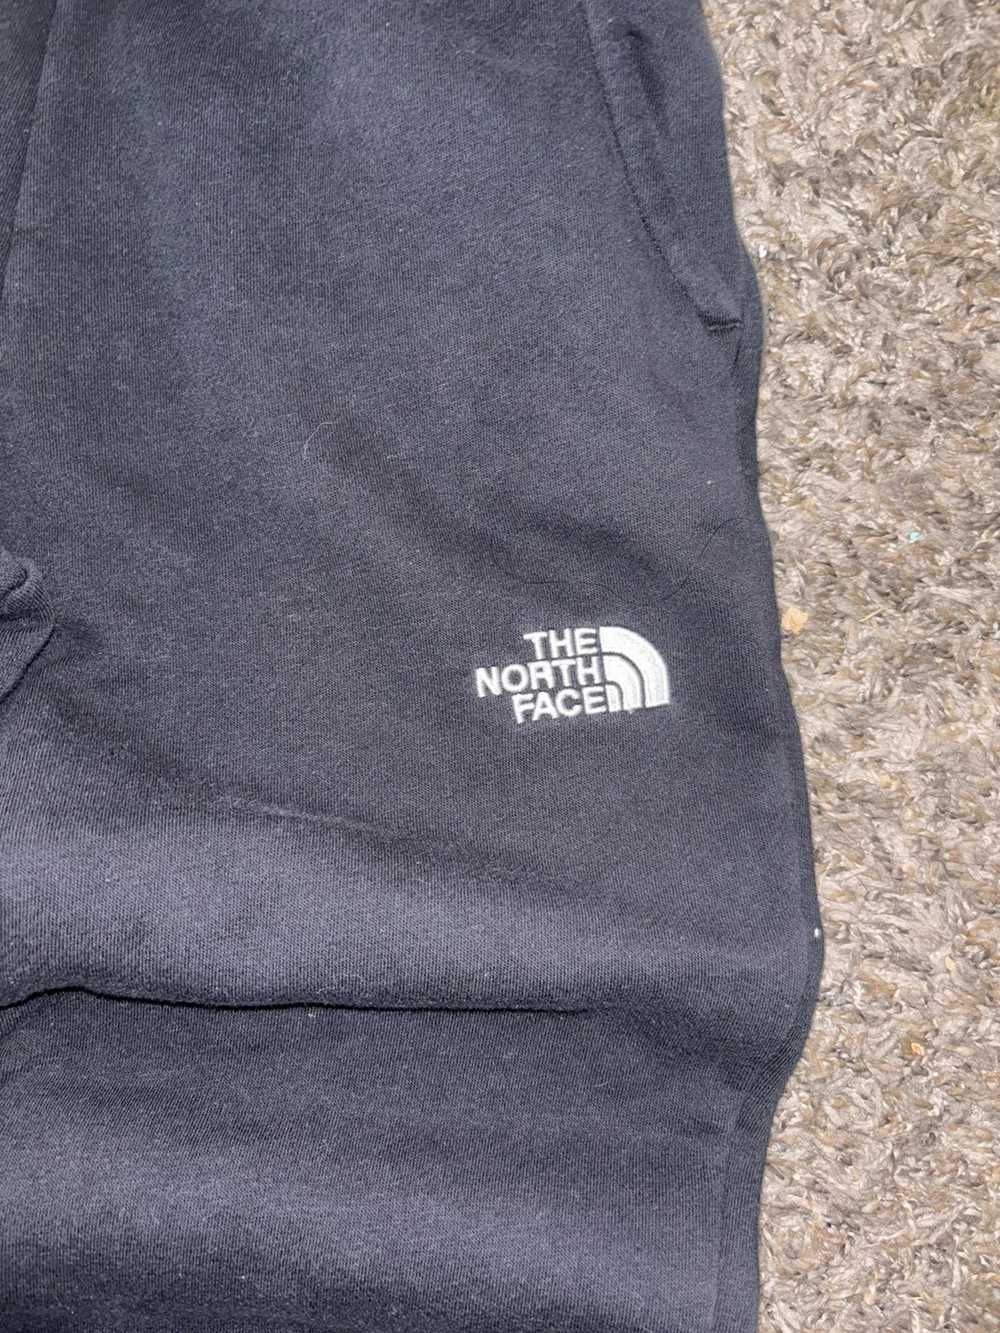 Streetwear × The North Face The North Face Joggers - image 2